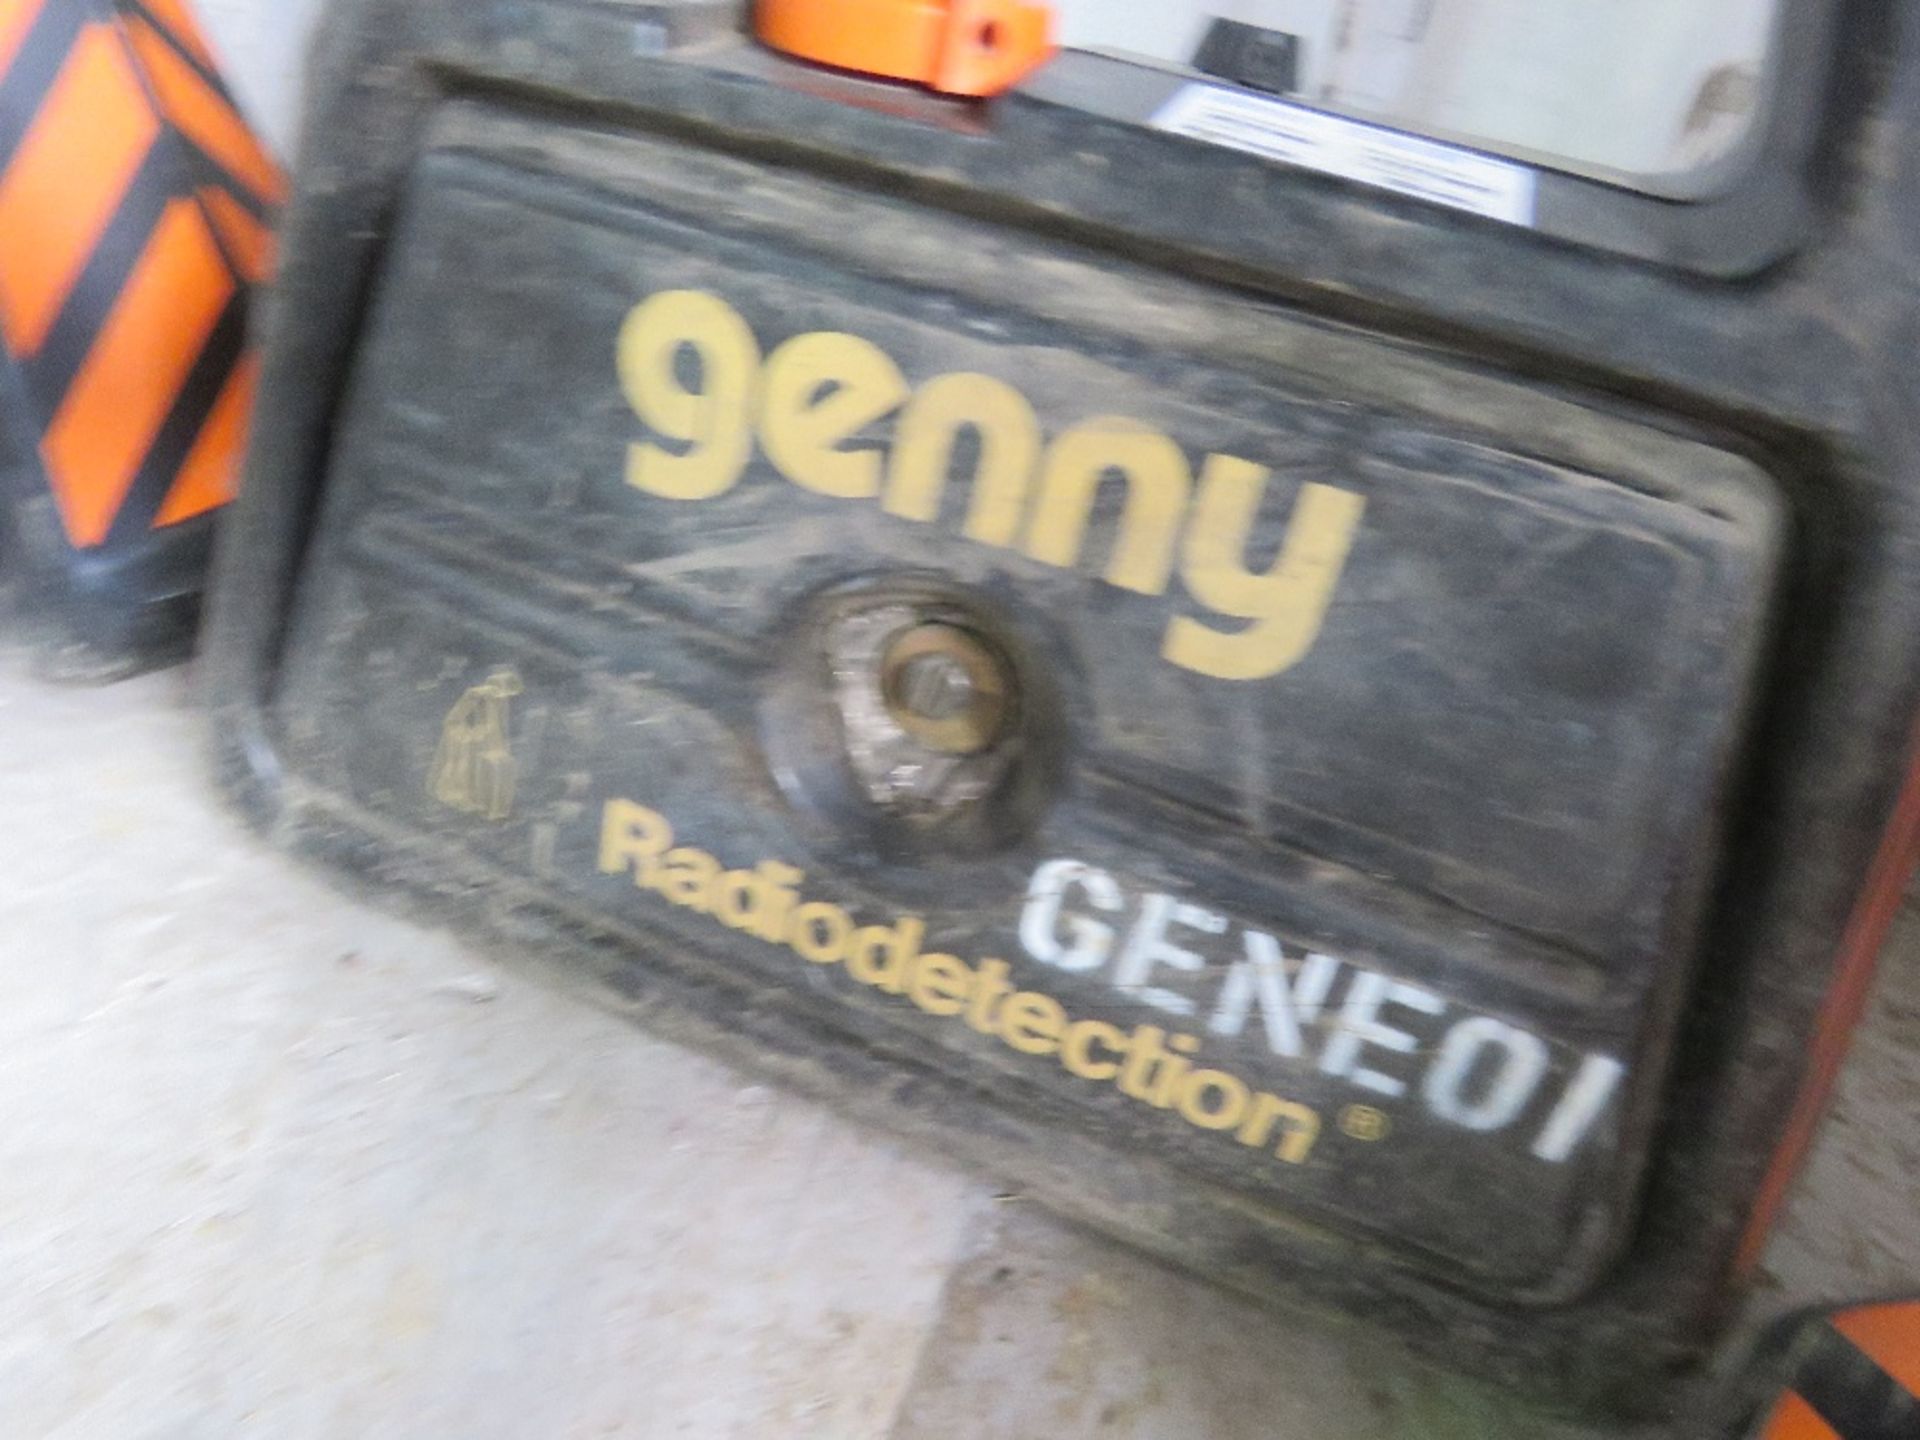 CAT AND GENNY CABLE DETECTOR SET. DIRECT FROM A LOCAL GROUNDWORKS COMPANY AS PART OF THEIR RESTRU - Image 3 of 3